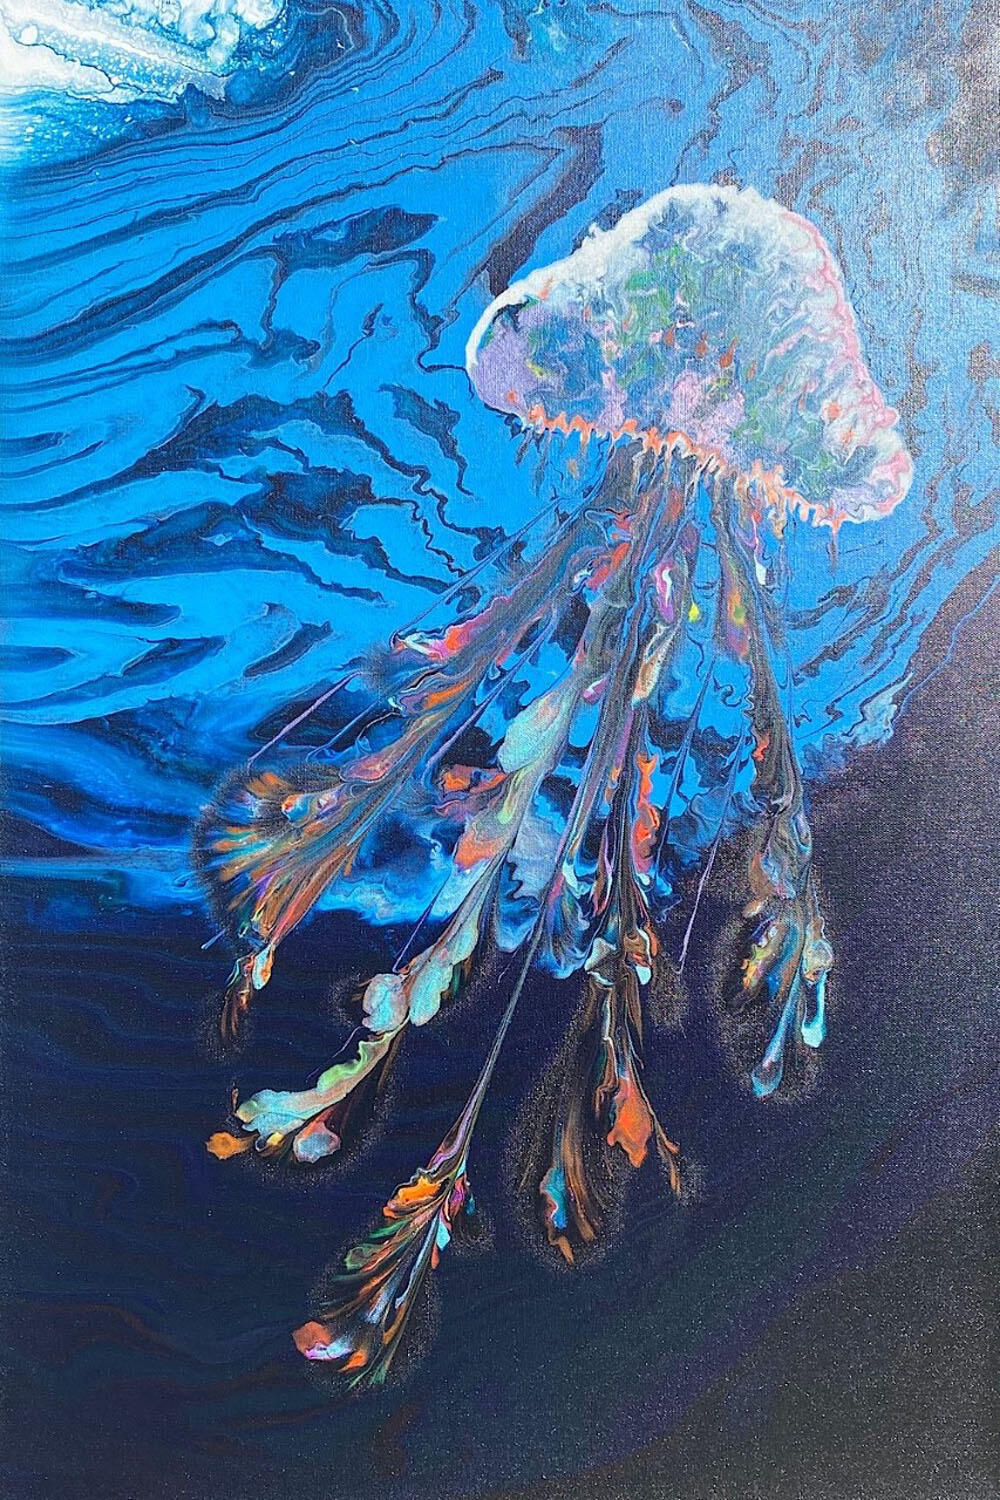 “Night Jellyfish” by Doyle Christensen will be one of the works displayed Sunday by Artstanding at the Gundlach Bundschu Winery in Sonoma. (Cathleen Francsico)